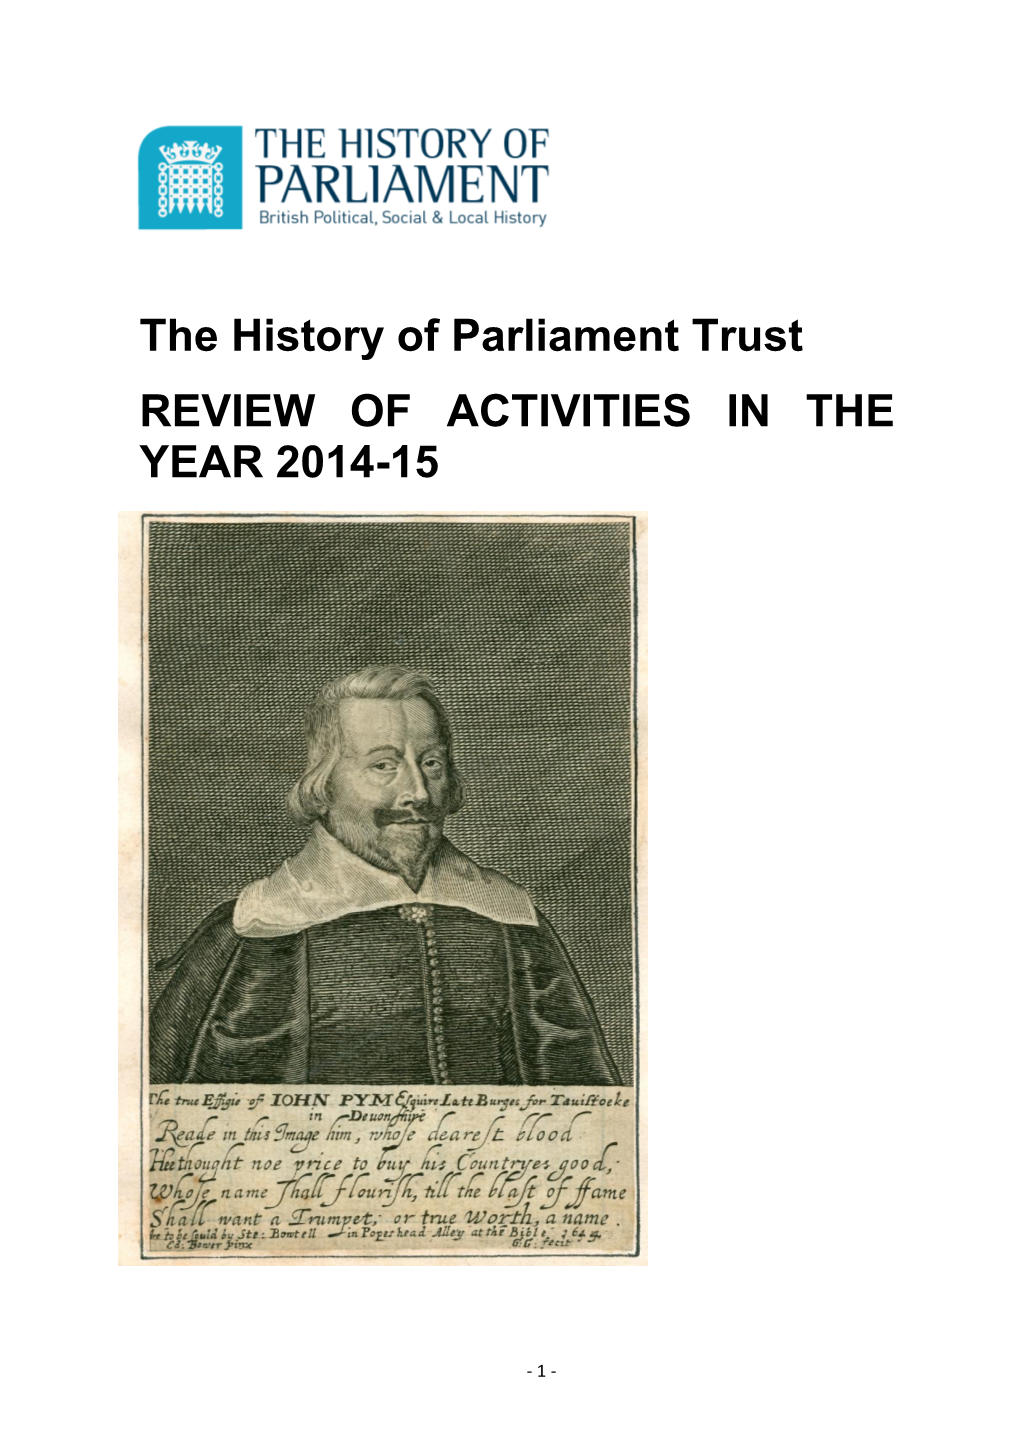 The History of Parliament Trust REVIEW of ACTIVITIES in the YEAR 2014-15